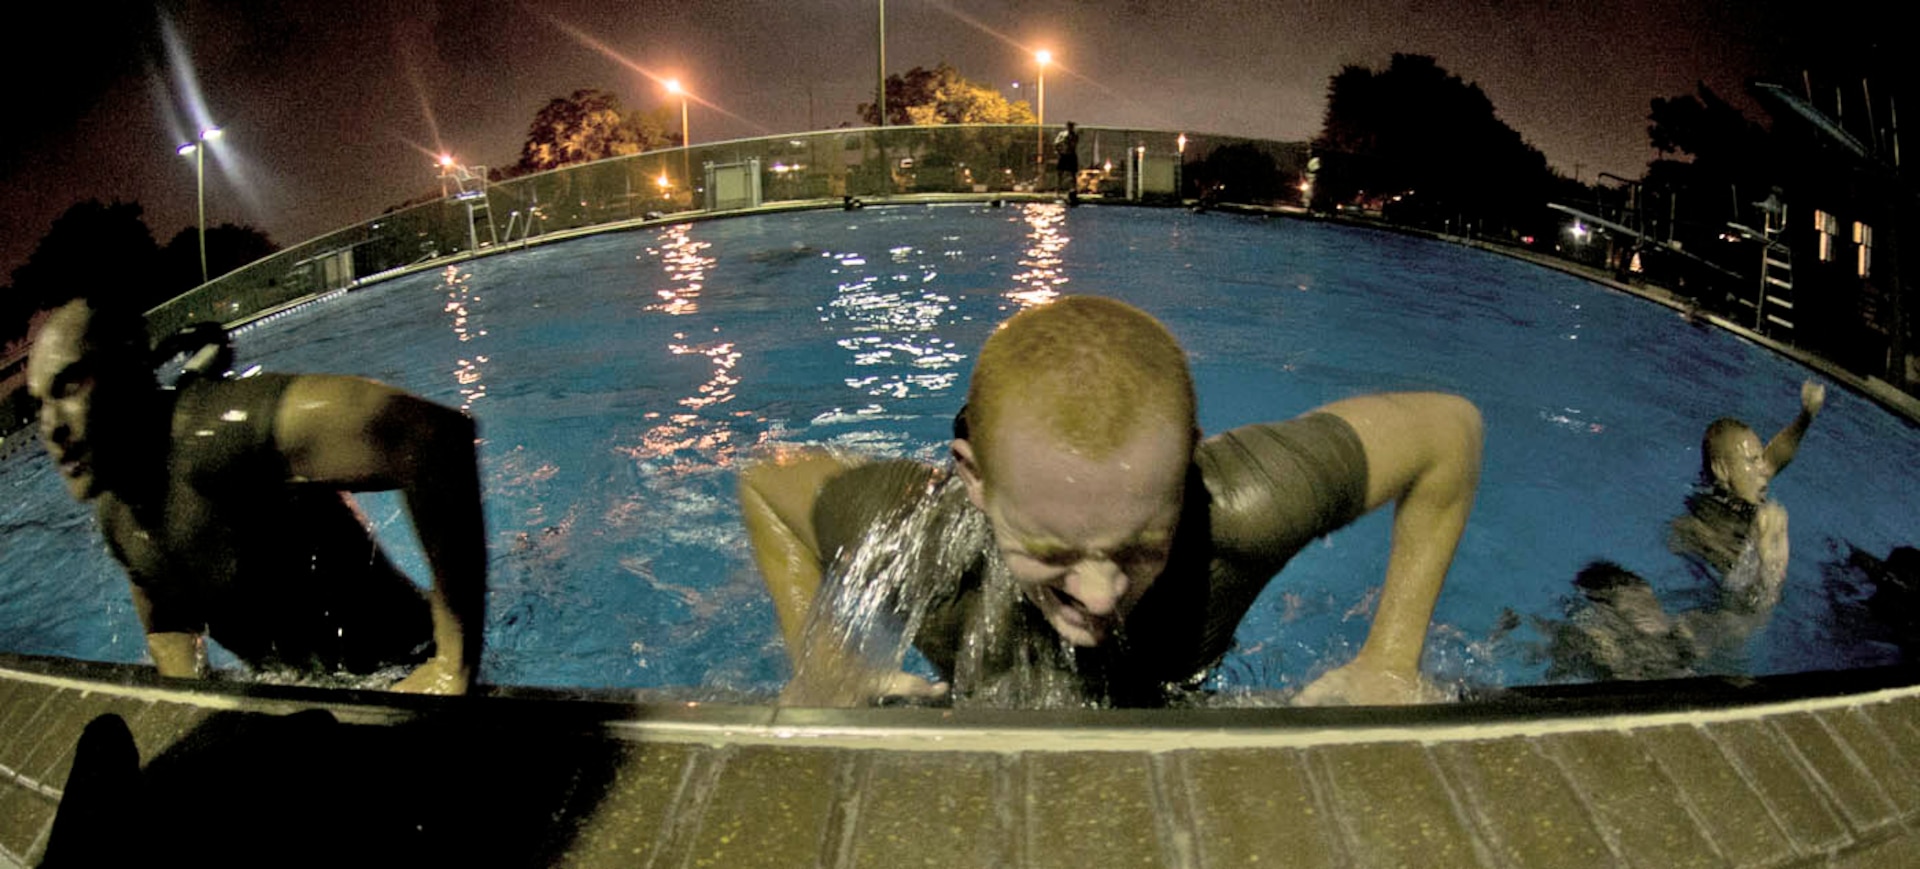 Airmen crawl out of the pool during the Air Force Pararescuemen Indoctrination Course at Lackland Sept. 6. Airmen are trained and evaluated on buddy breathing, deep water swimming and other challenges. (U.S. Air Force photo/Staff Sgt. Araceli Alarcon)